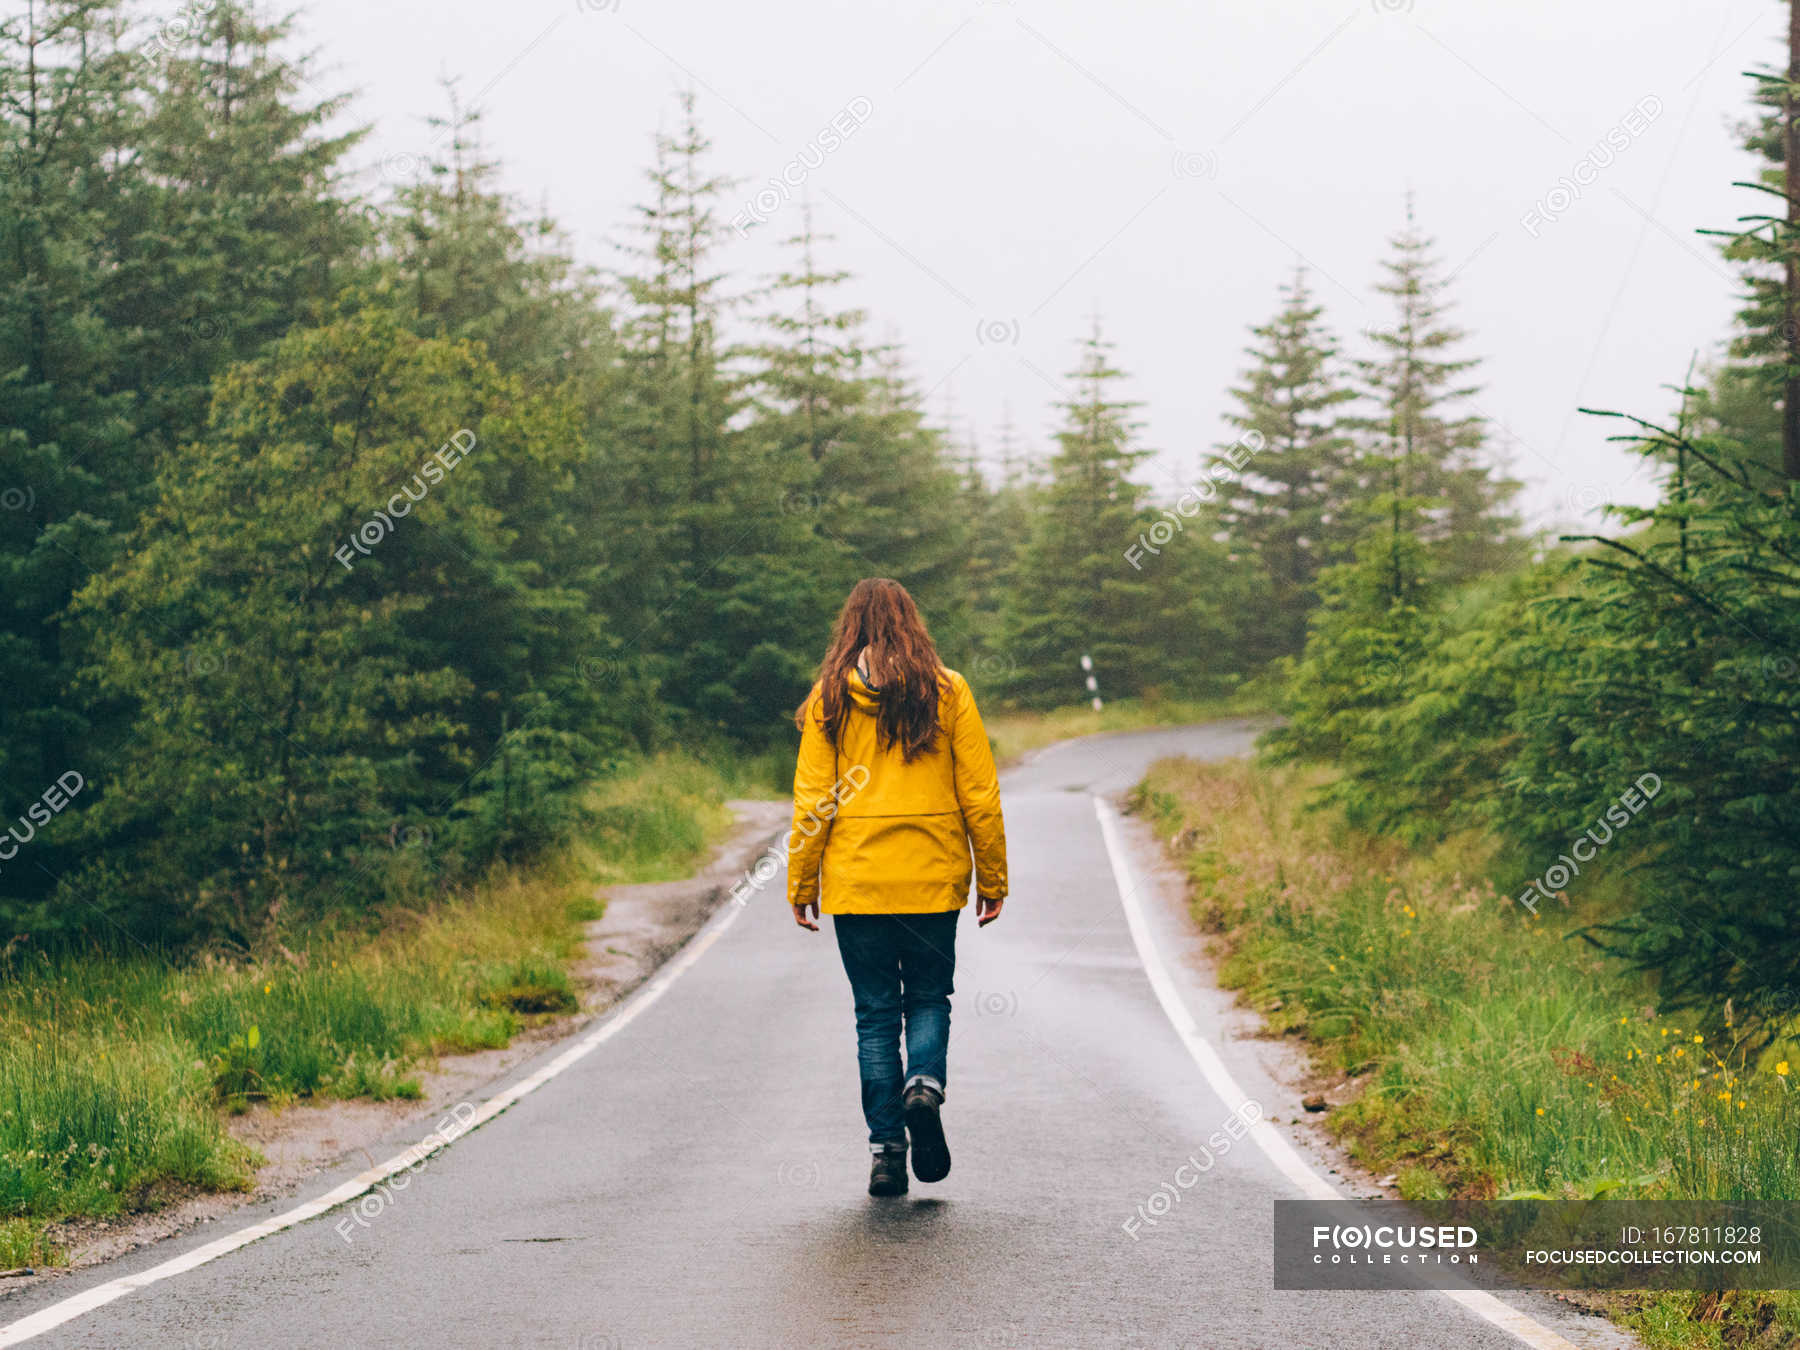 Girl walking forest road — beautiful, color - Stock Photo | #167811828